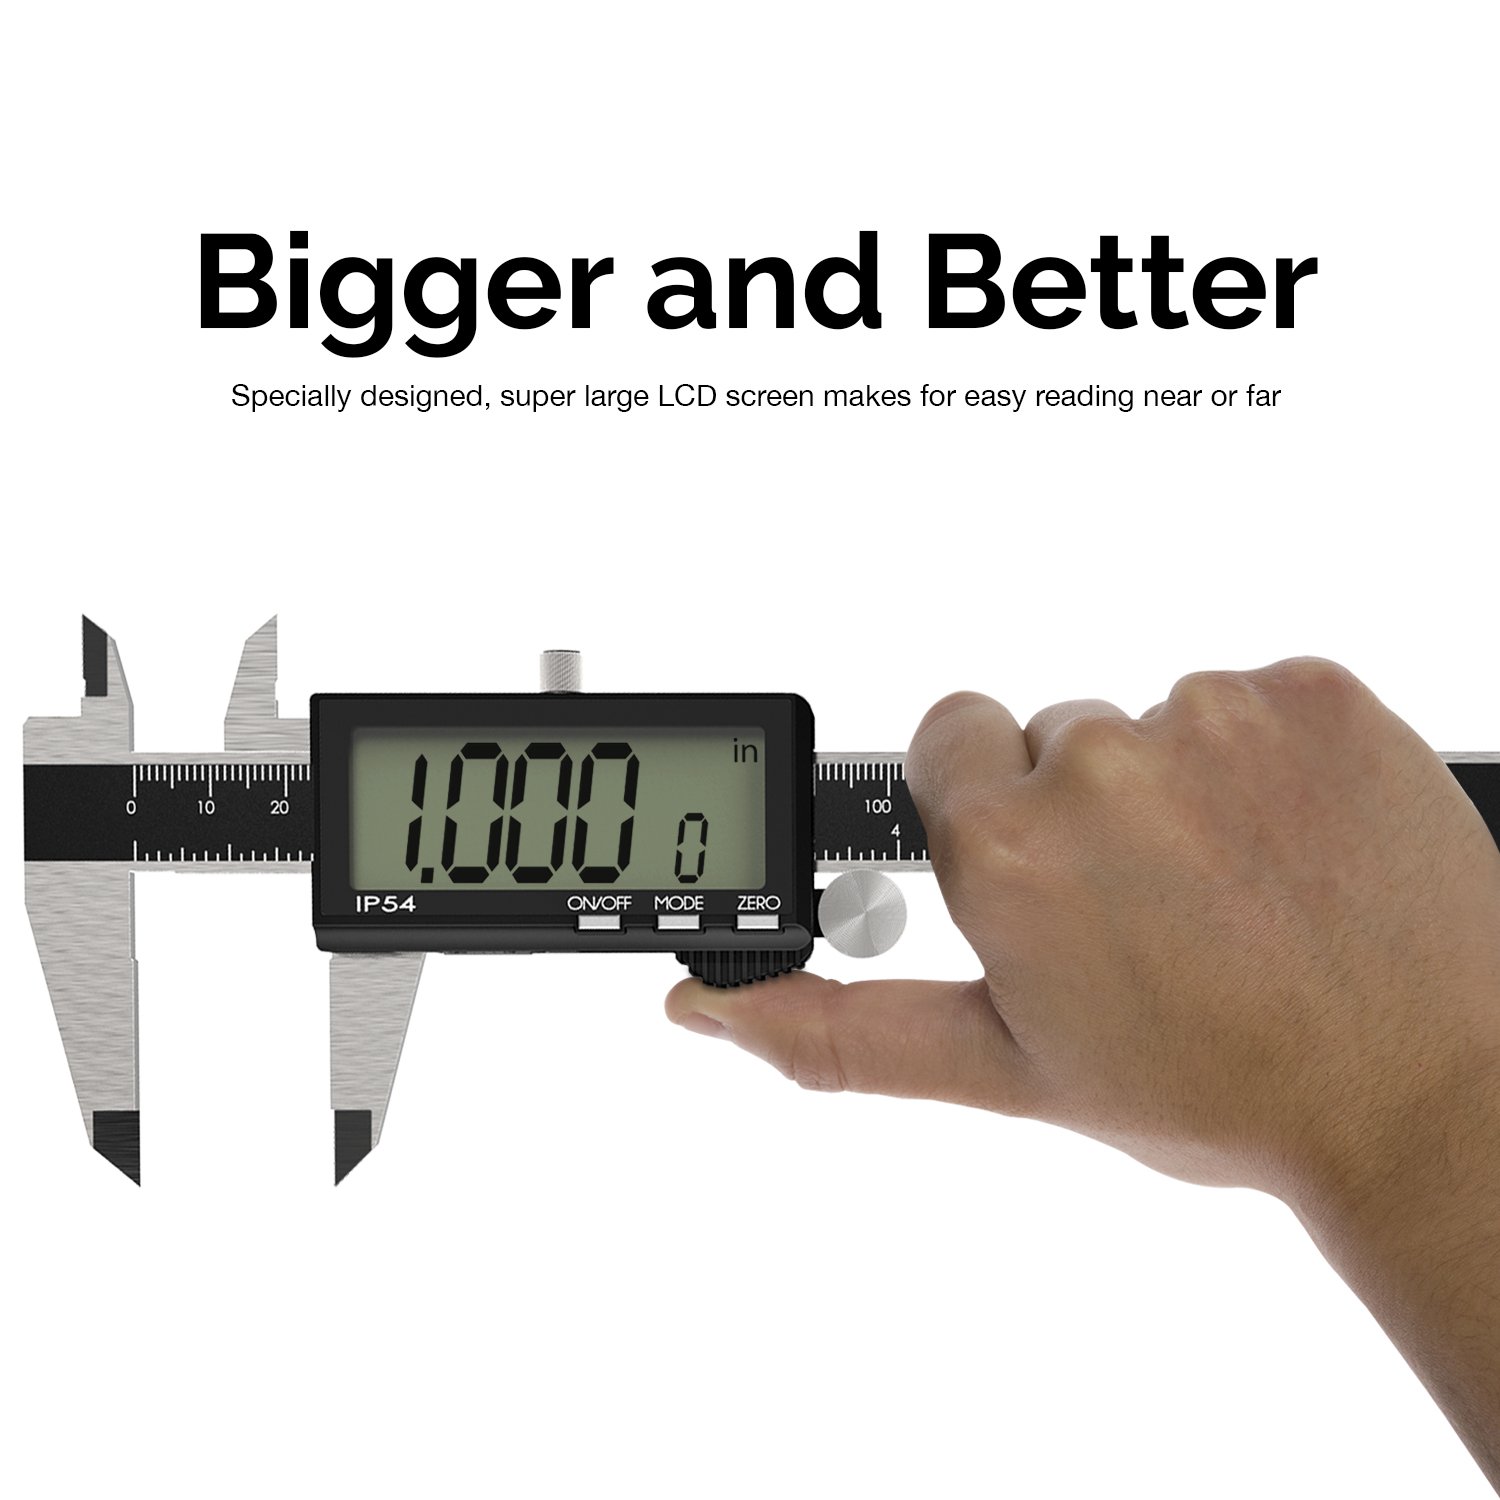 NEIKO 01401A 6-Inch Electronic Digital Caliper, Stainless Steel, Extra Large LCD Screen, Measurement Conversions for Inches, Millimeters, and Fractions, 1 LR44 batteries required. (included)